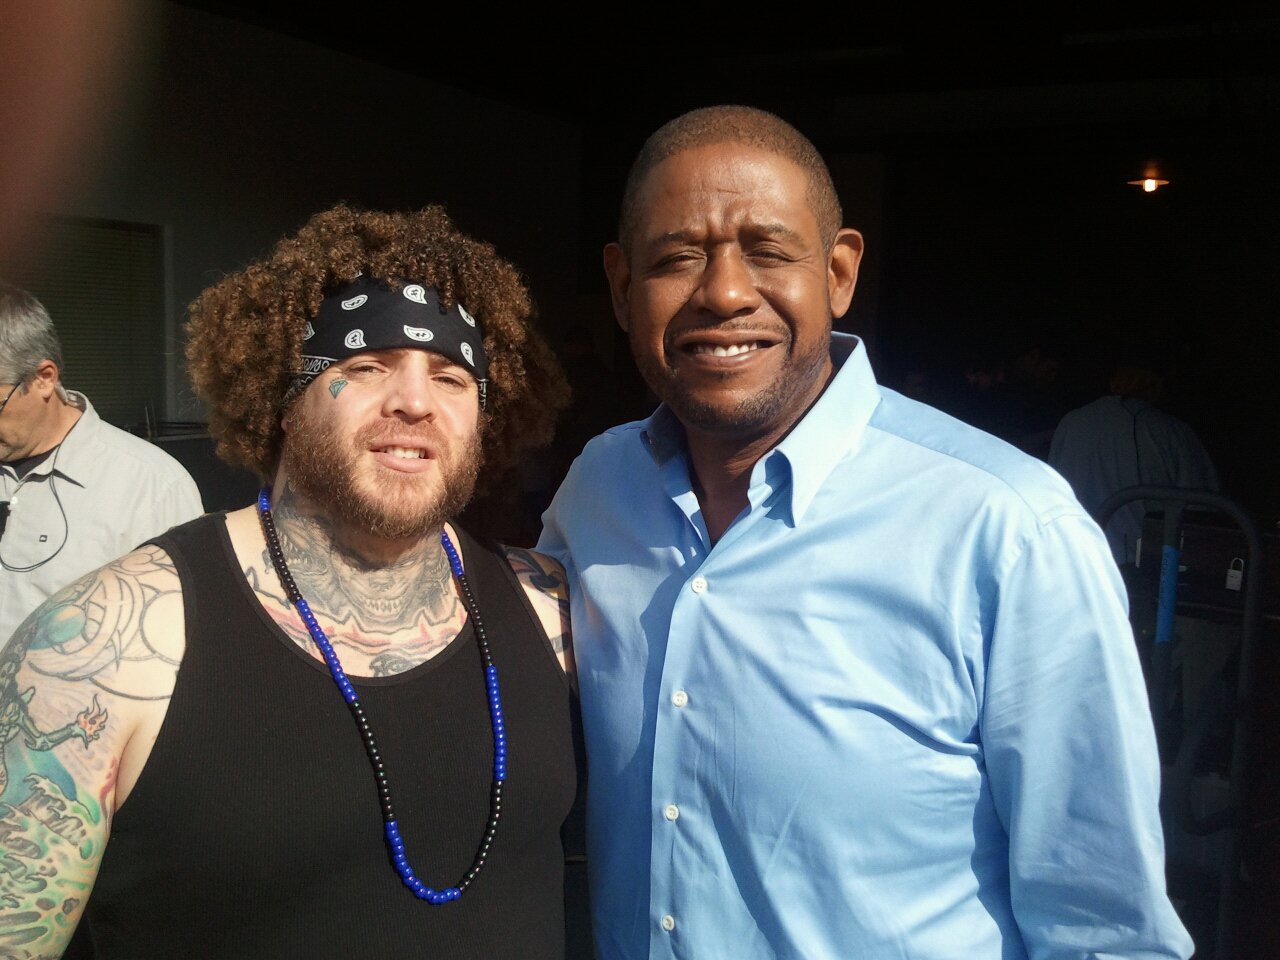 Playing Cops N Criminals with Forest Whitaker